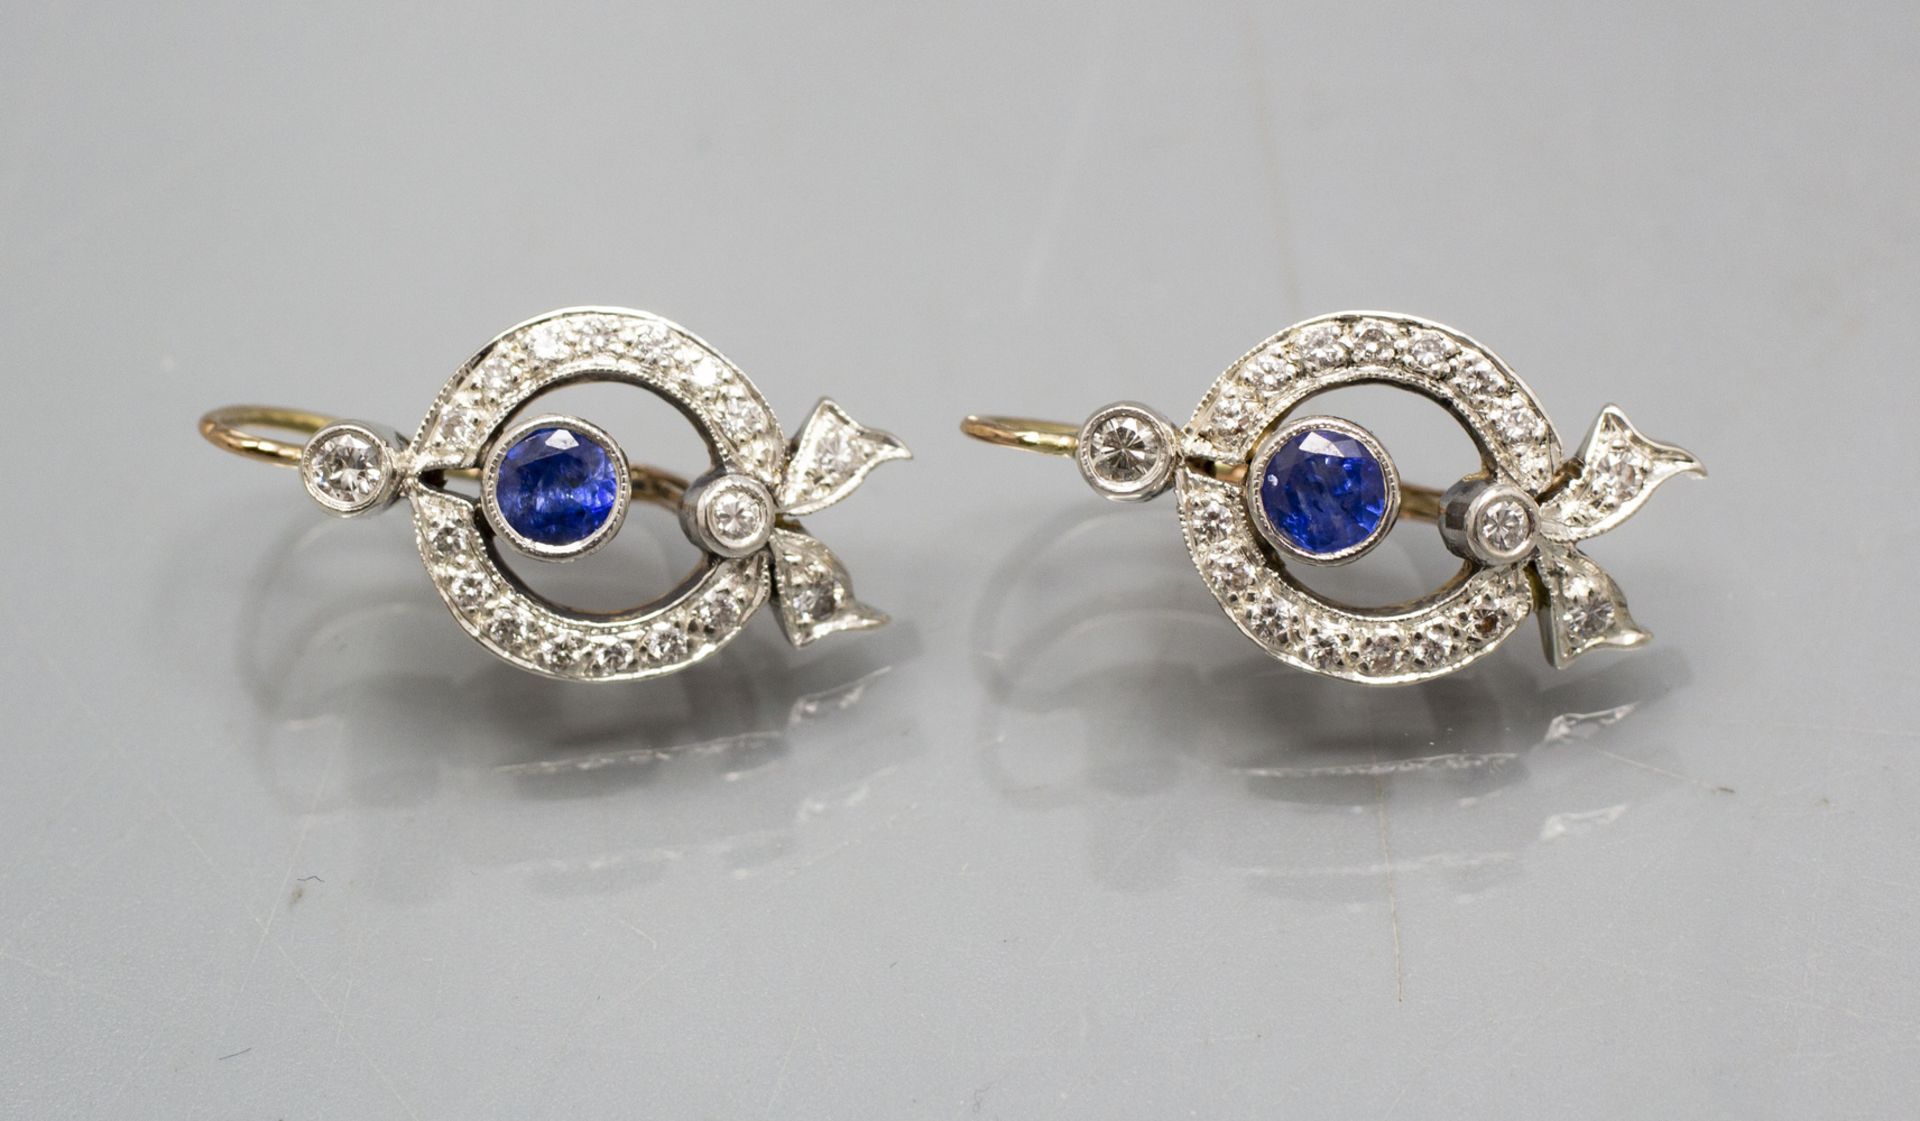 Paar Ohrringe mit Saphir und Diamanten / A pair of 14 ct gold earrings with diamonds and sapphire